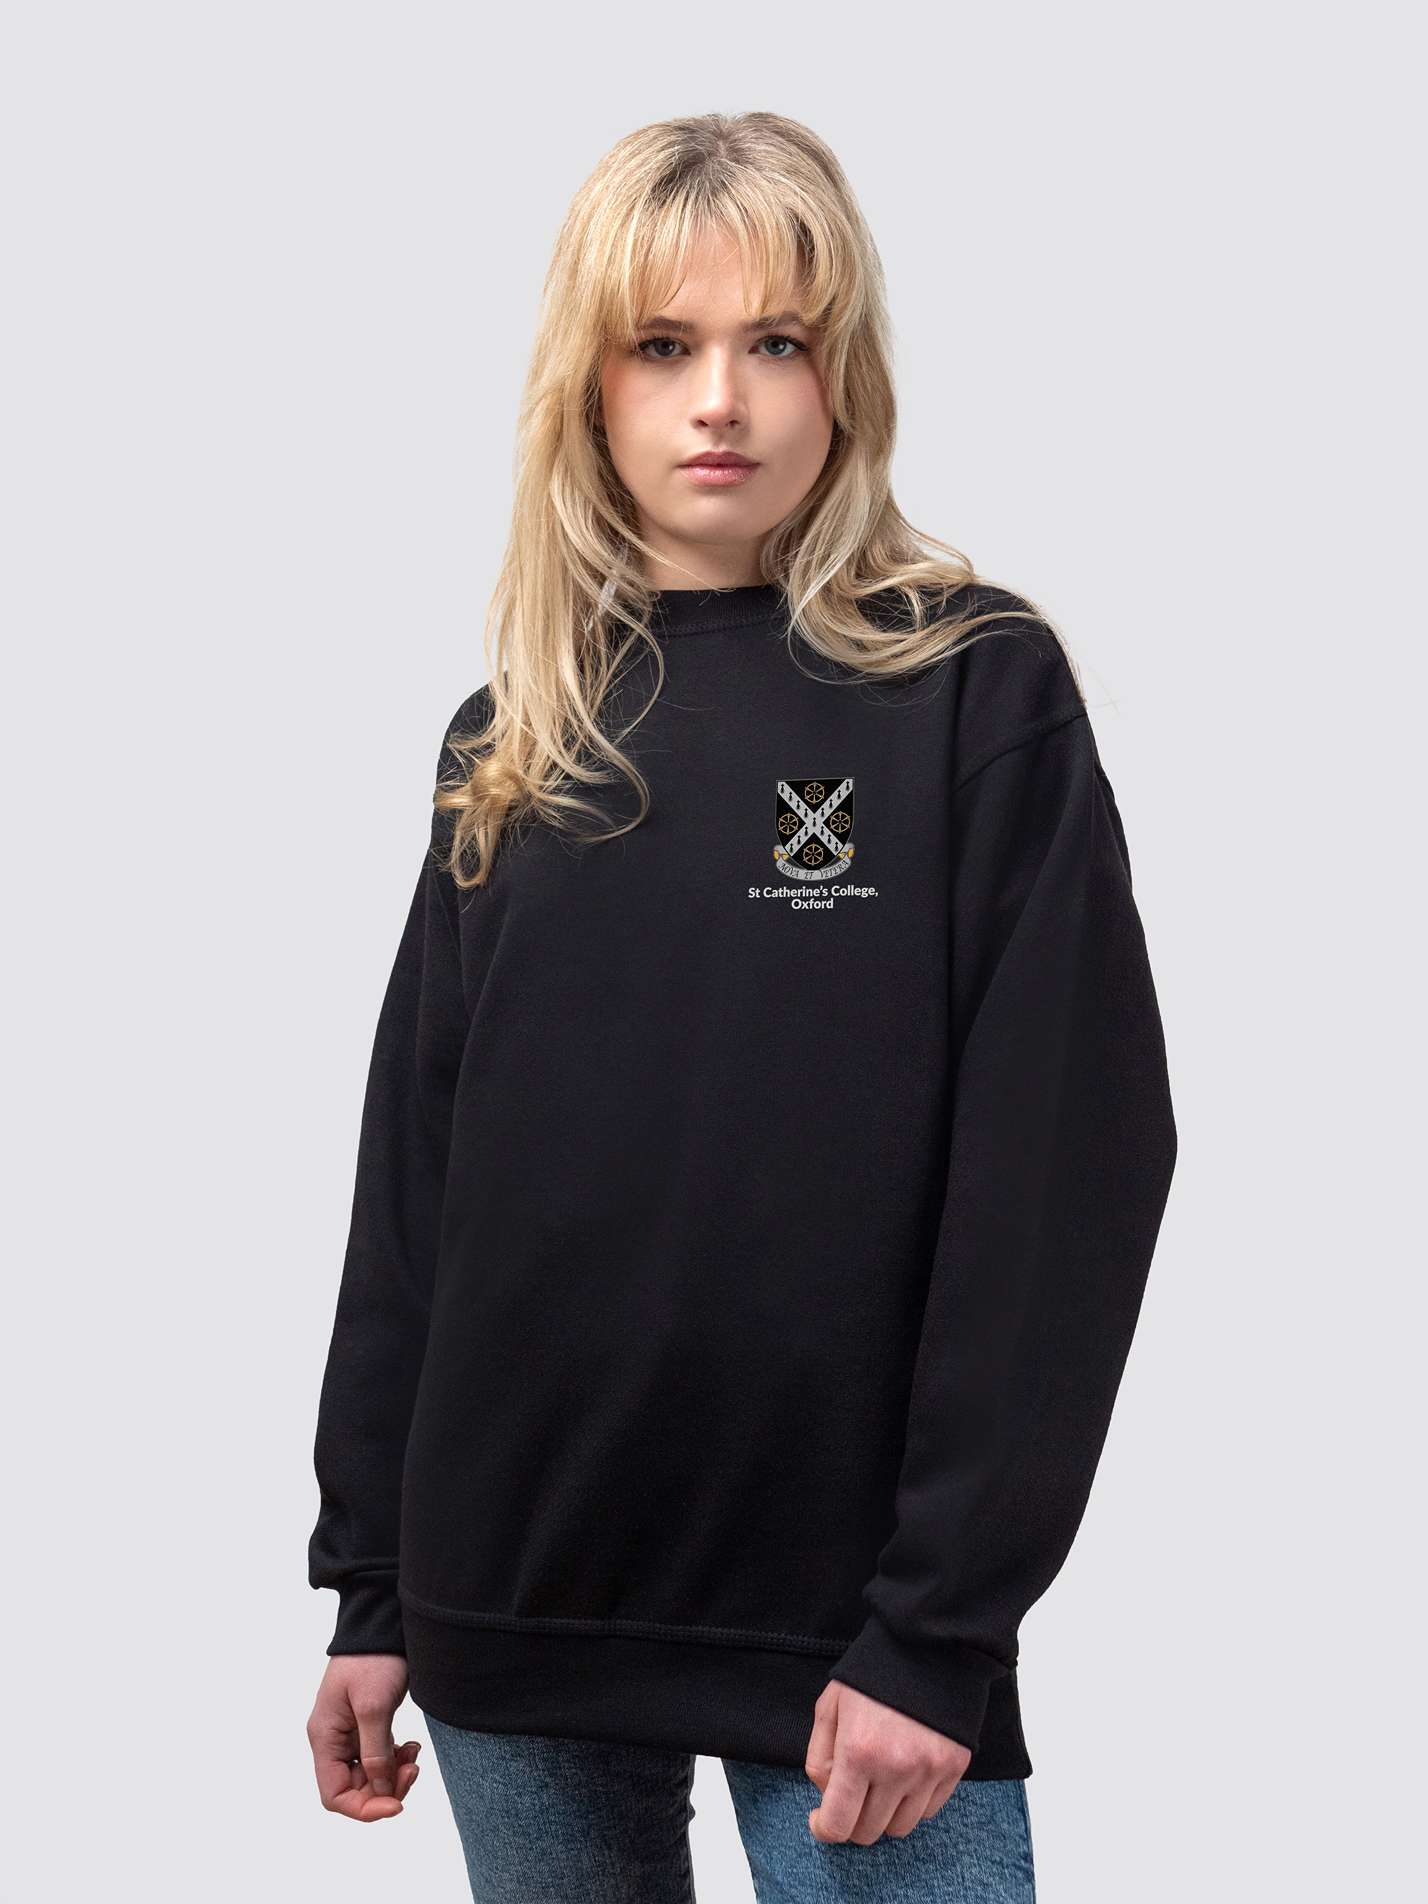 St Catherine's College crest on the front of a black, crew-neck sweatshirt